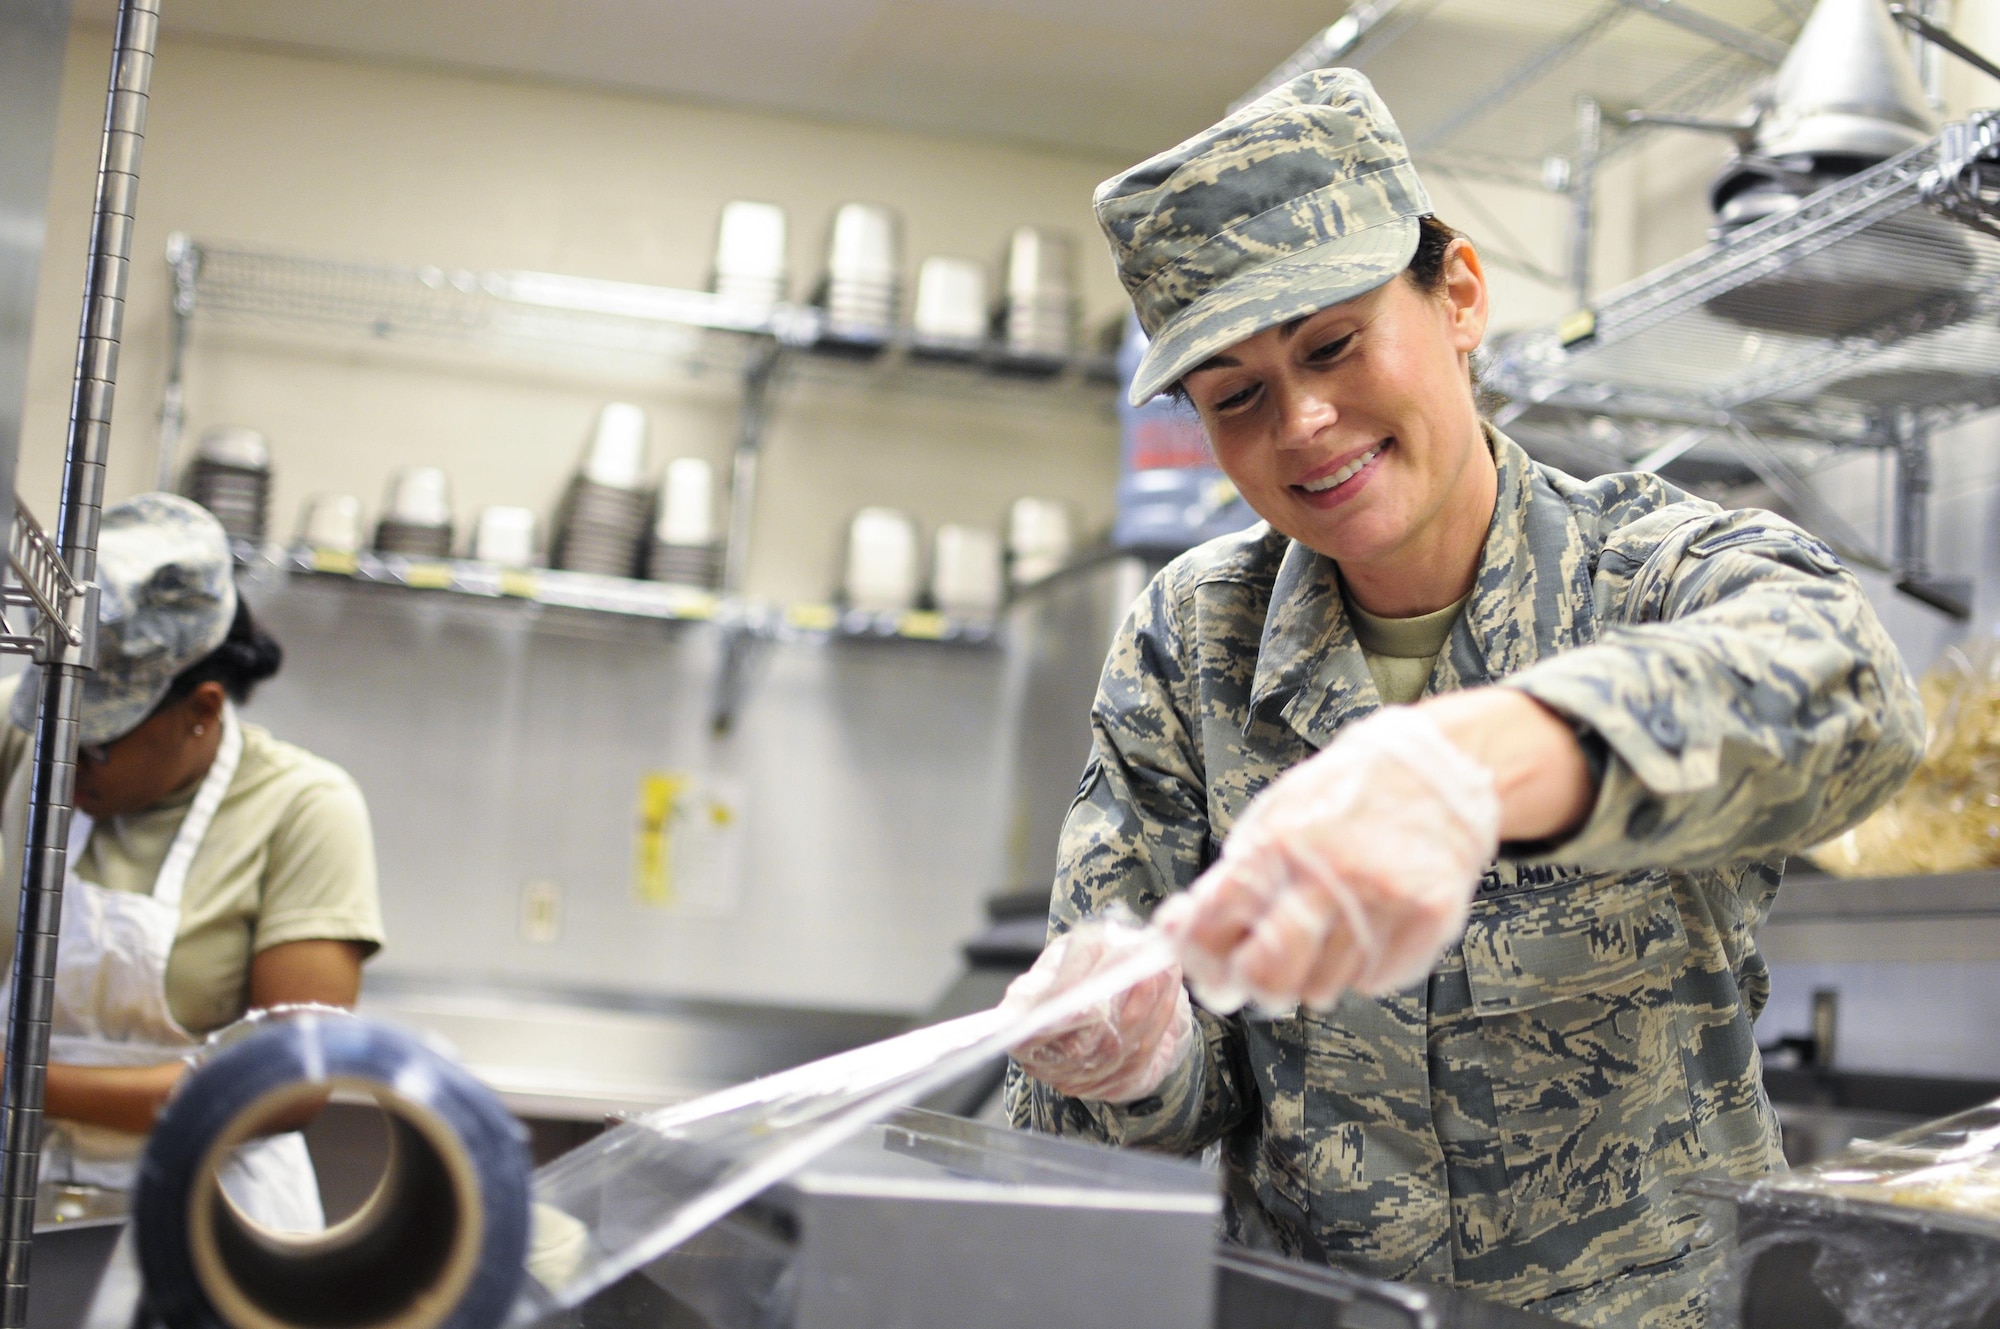 Airman 1st Class Tanya L. Brown, a services journeyman with Illinois Air National Guard’s 182nd Force Support Squadron, wraps food after lunch in Peoria, Ill., May 2, 2015. Brown, a full-time beautician, farmer, student, wife and mother, enlisted in the Air National Guard at the age of 35. (U.S. Air National Guard photo/Staff Sgt. Lealan Buehrer)